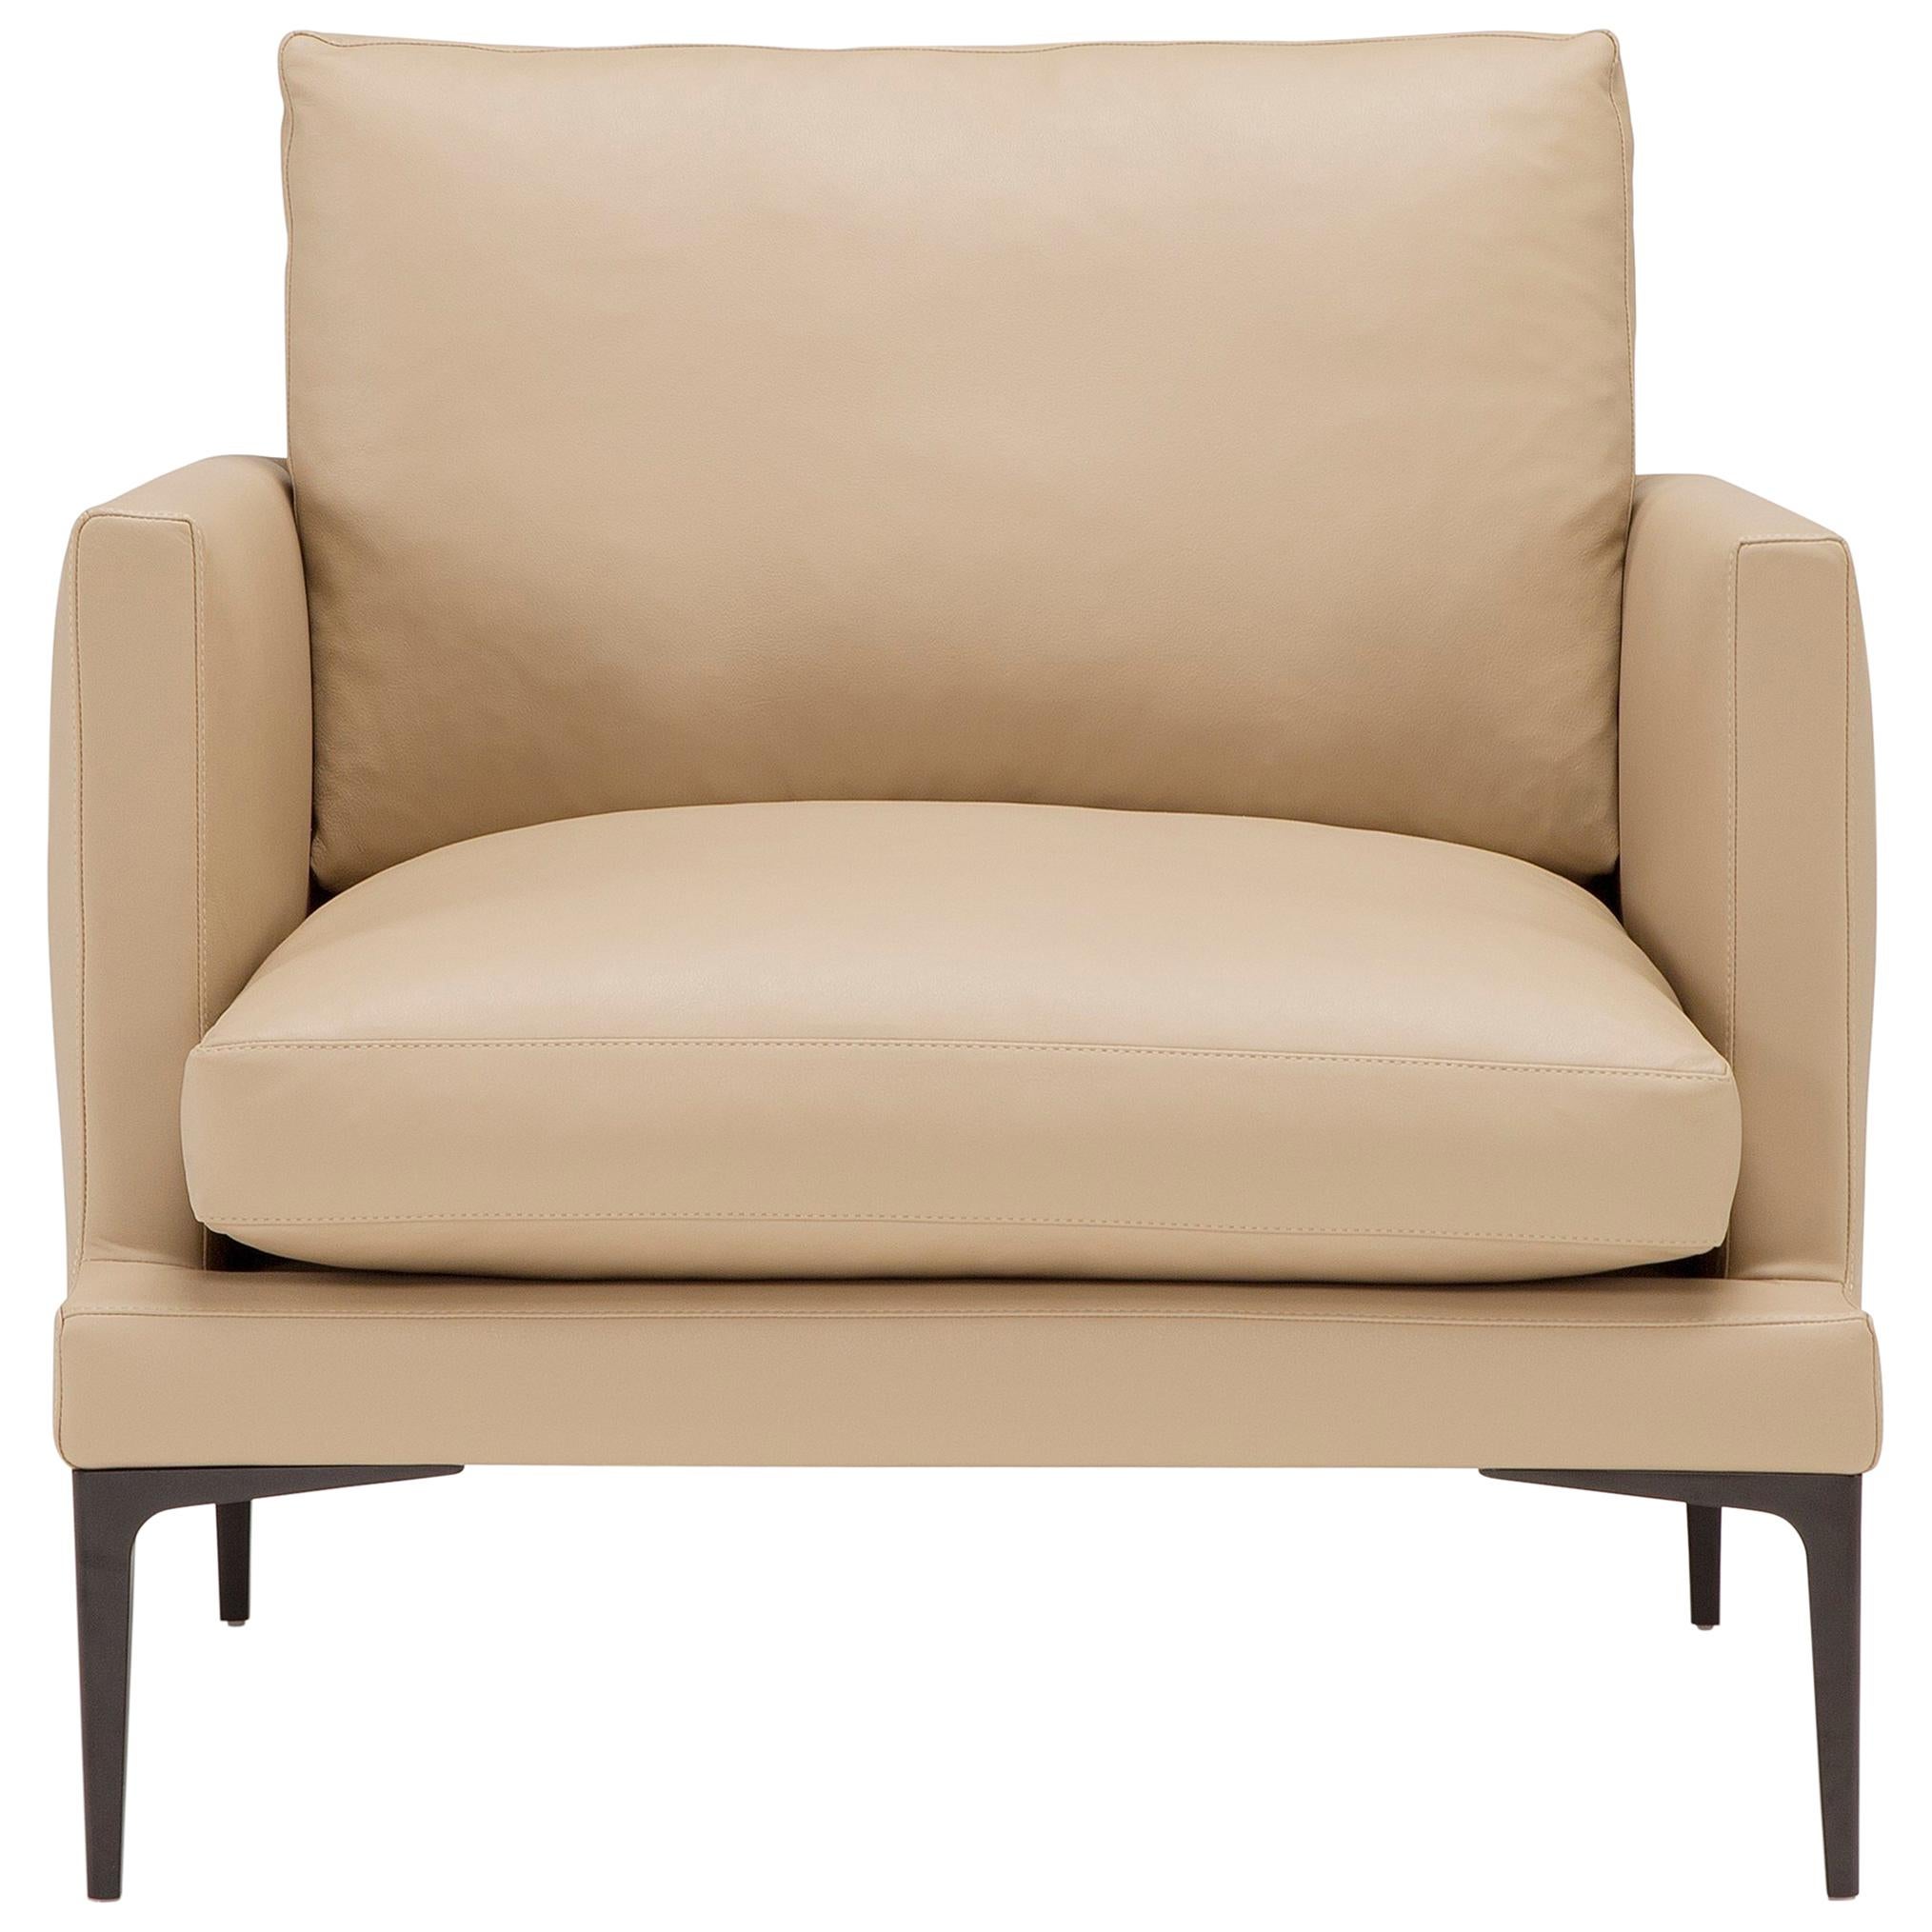 Amura 'Segno' Armchair in Beige Leather by Amura 'Lab For Sale